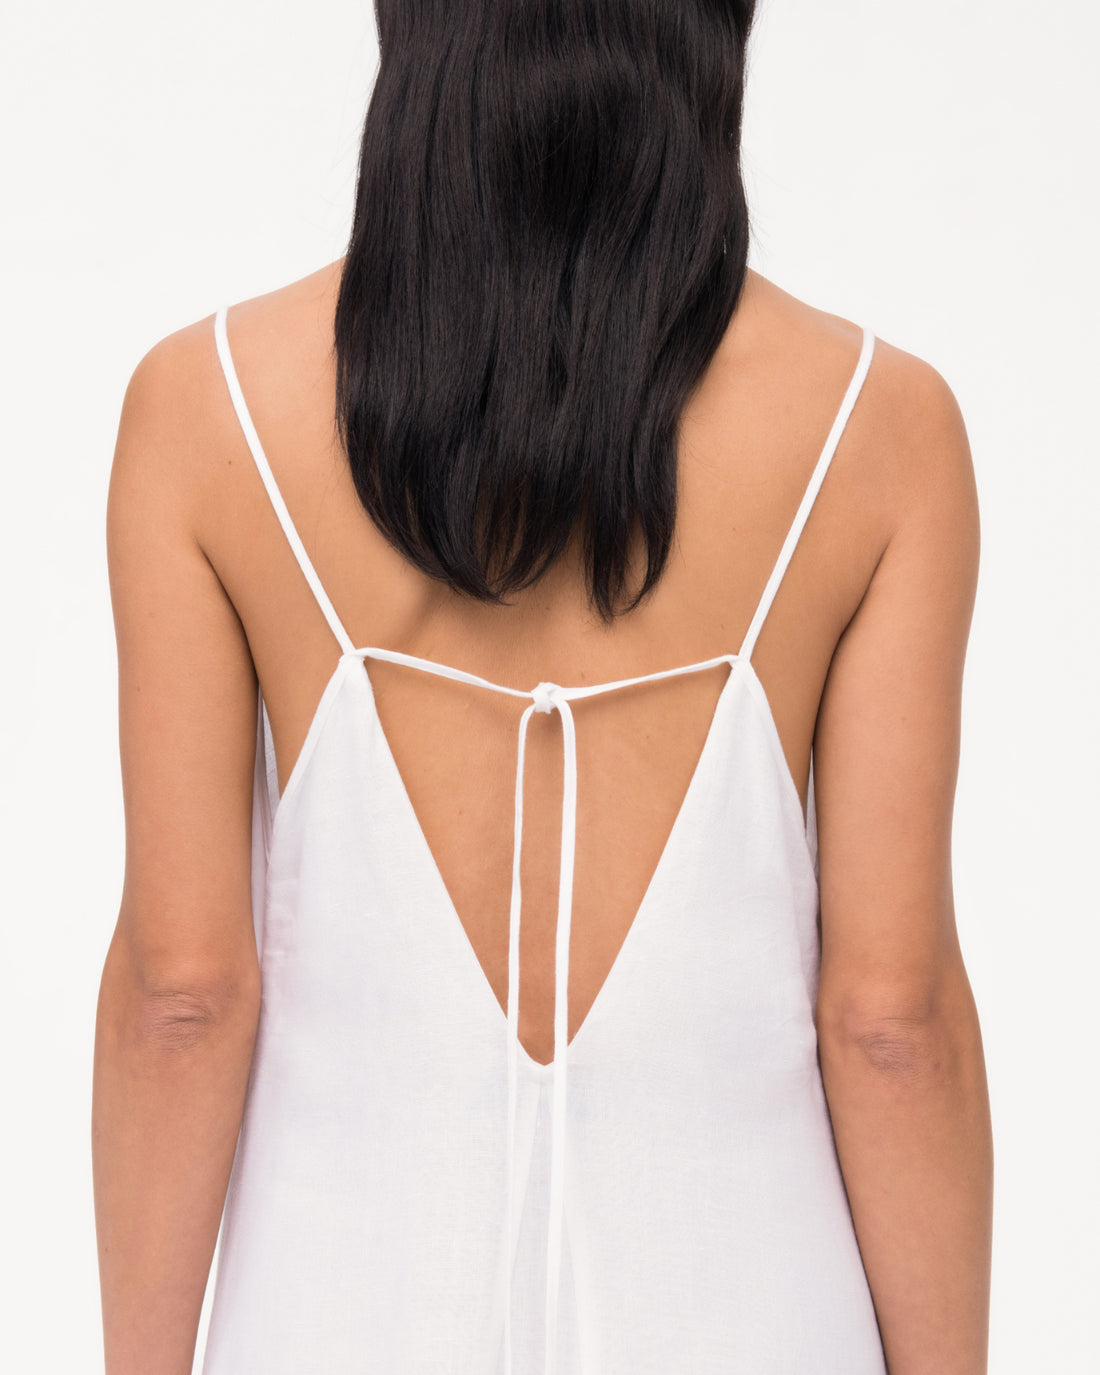 Organic Cotton Open Back Strappy Tank Top Camisole with Built in